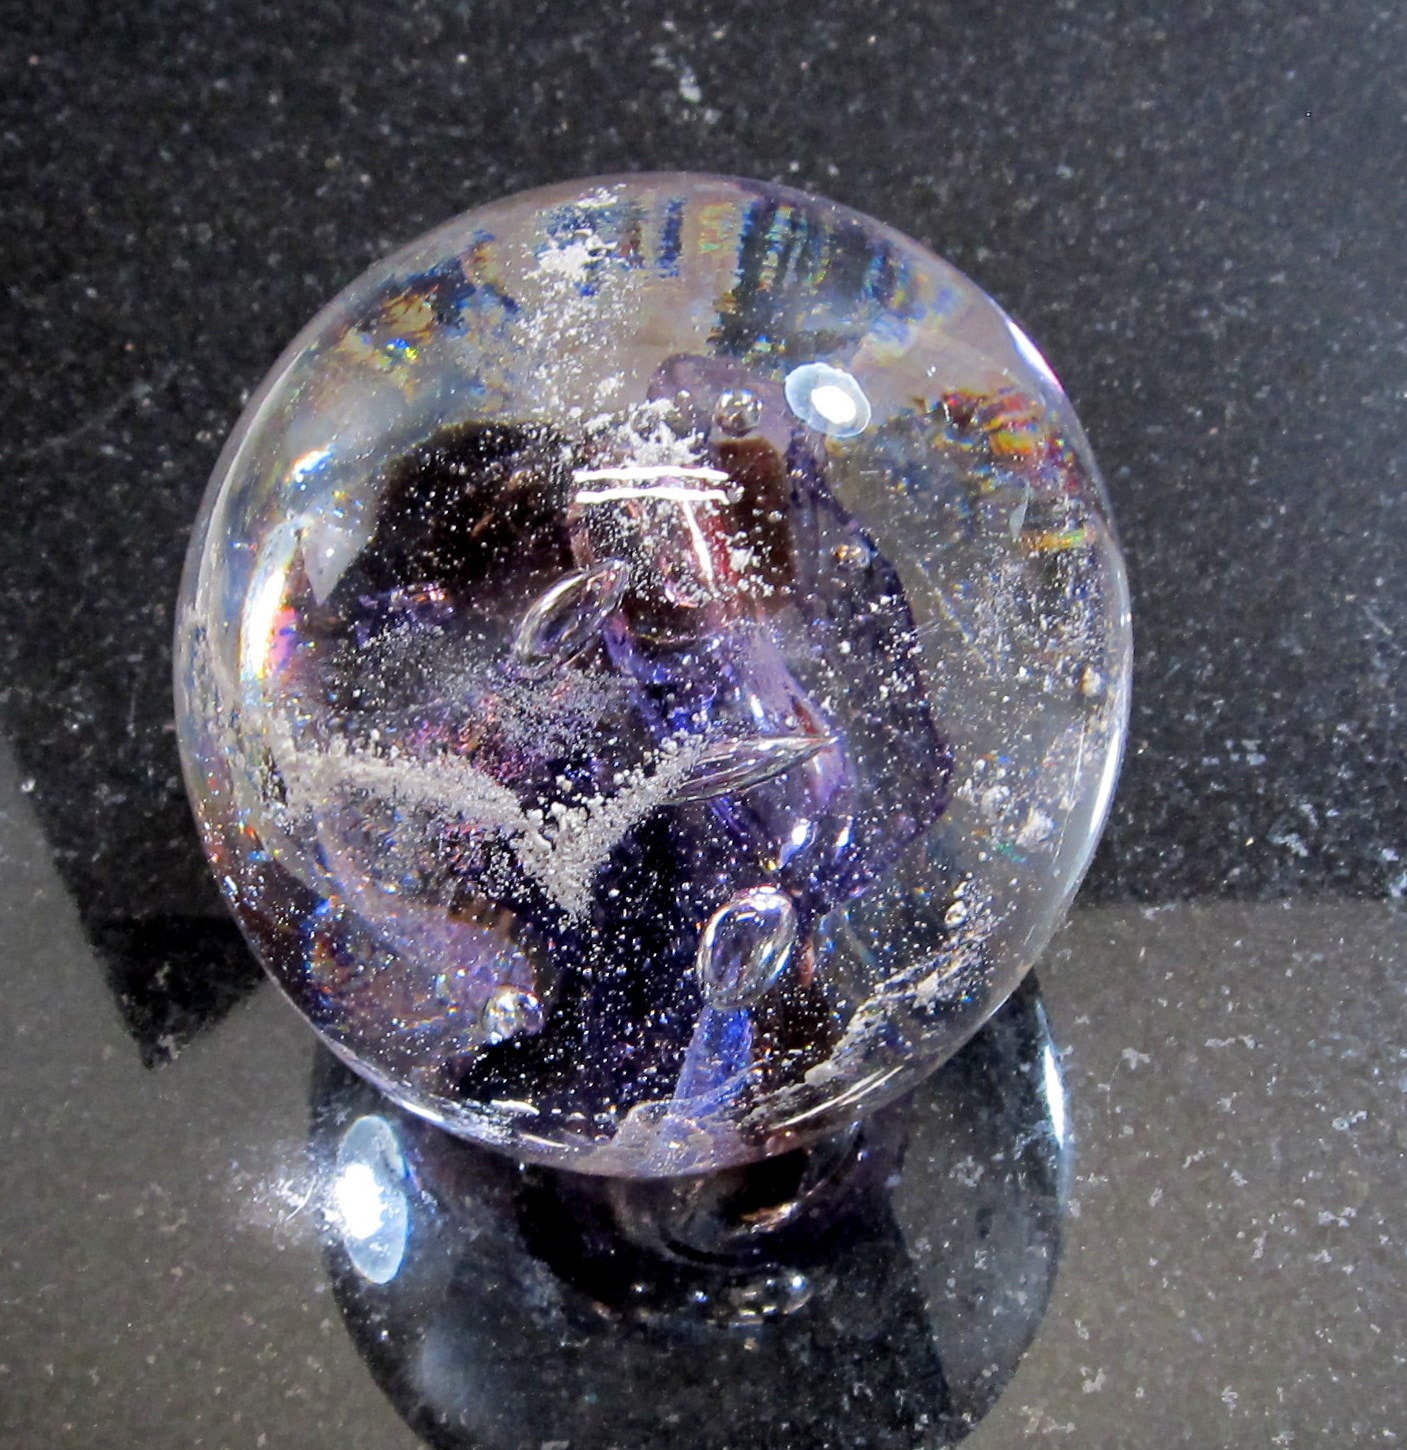 blown glass art with cremation ashes